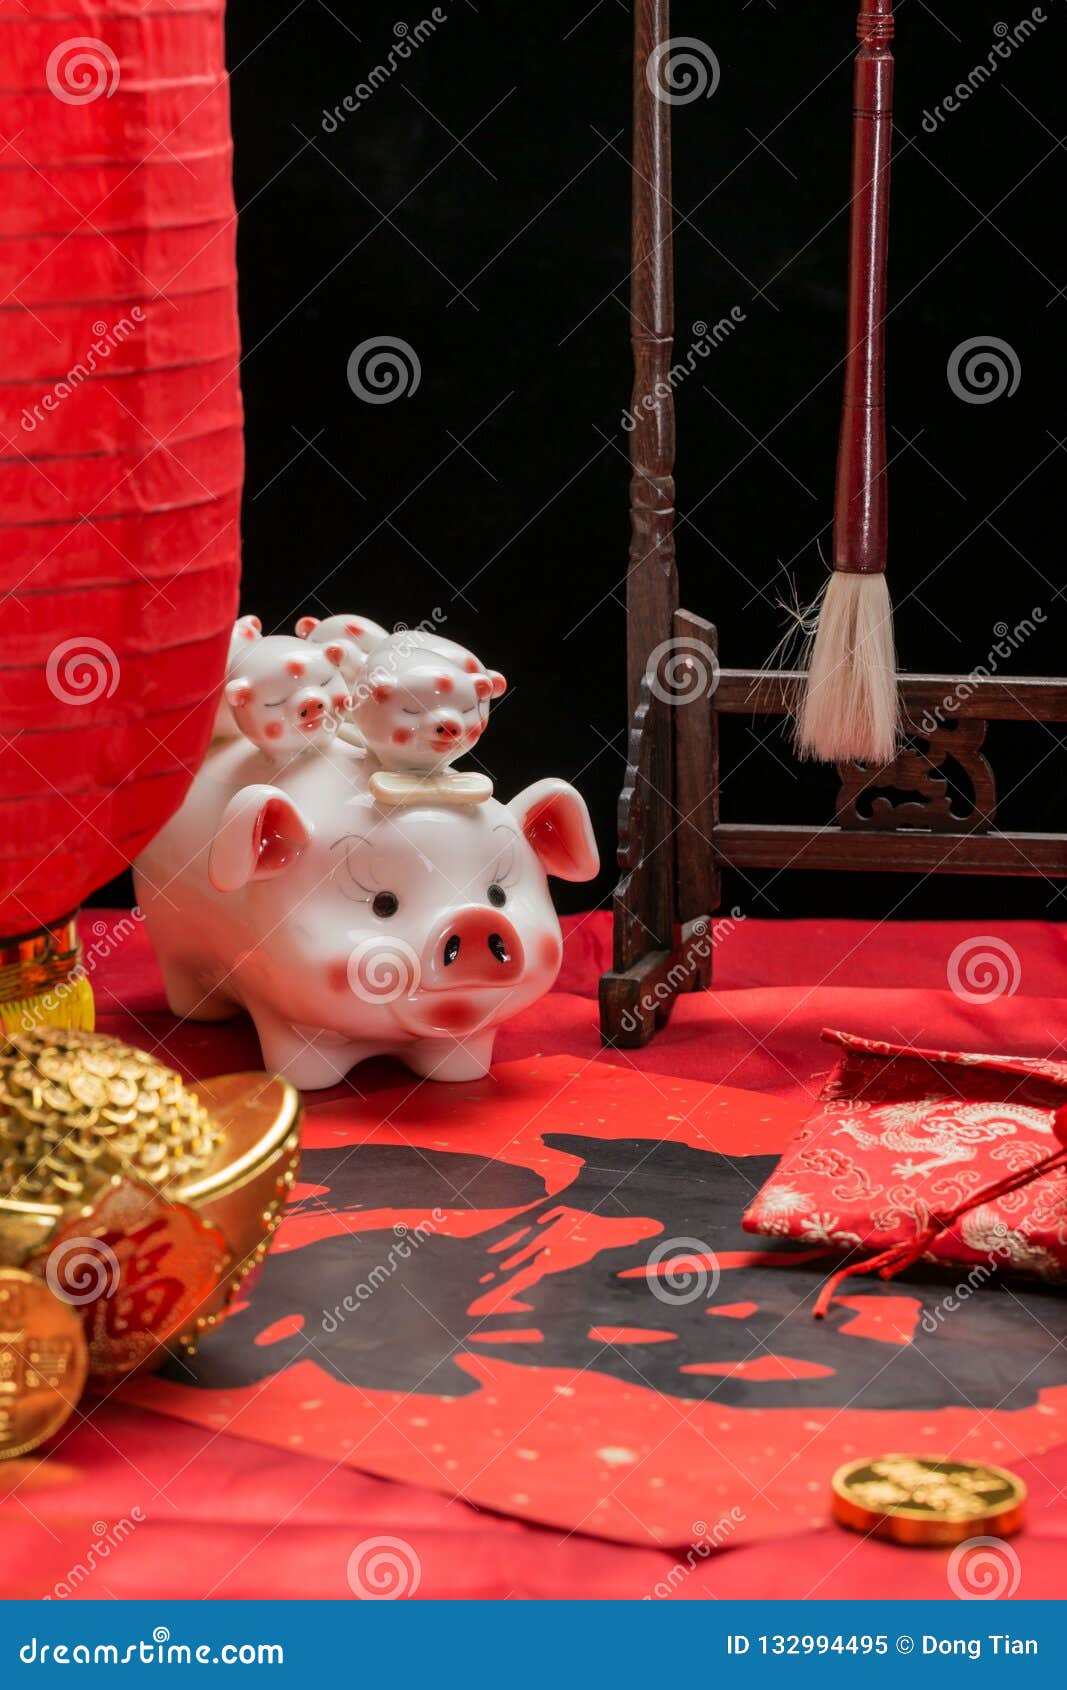 something-with-chinese-lunar-new-year-elements-stock-image-image-of